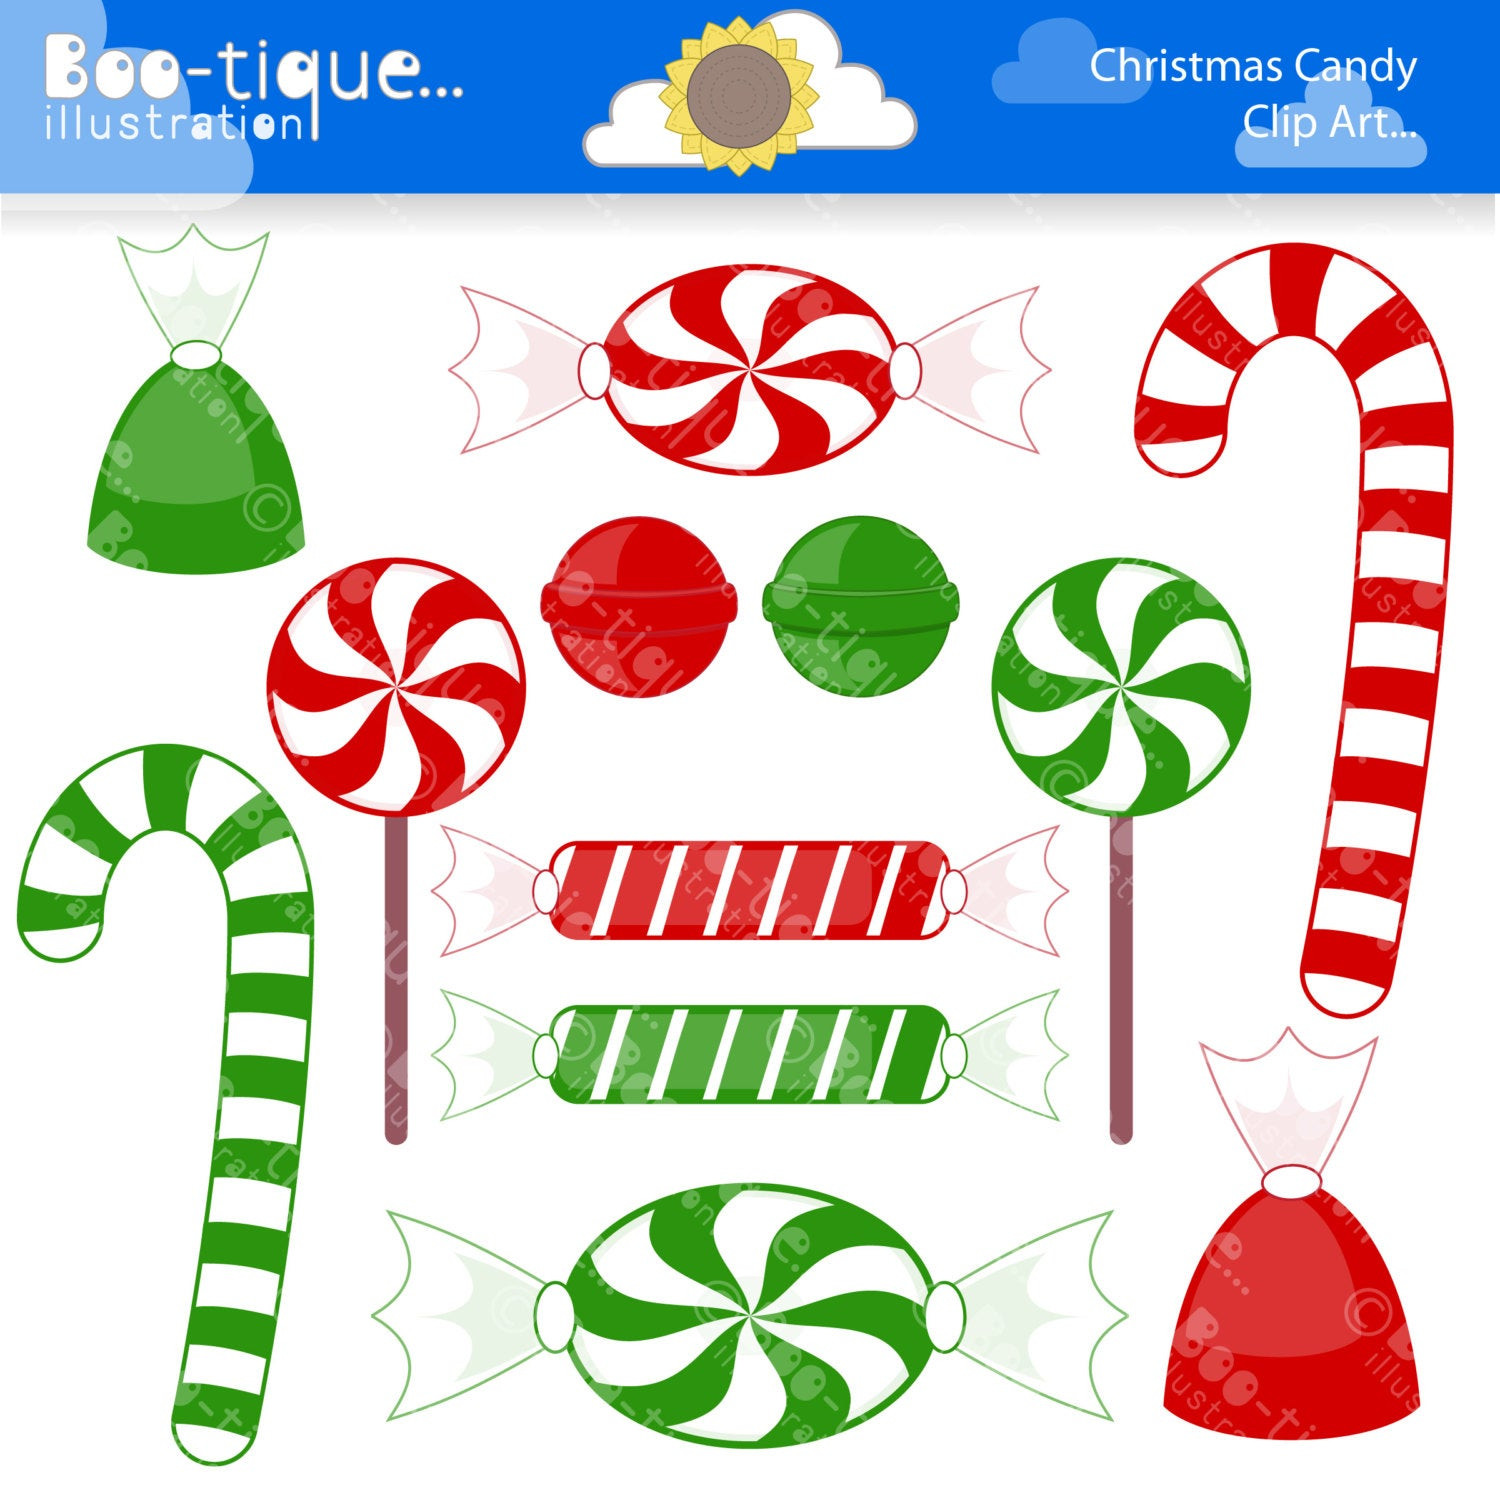 Christmas Candy Clip Art
 Christmas Candy Digital Clipart for Instant Download